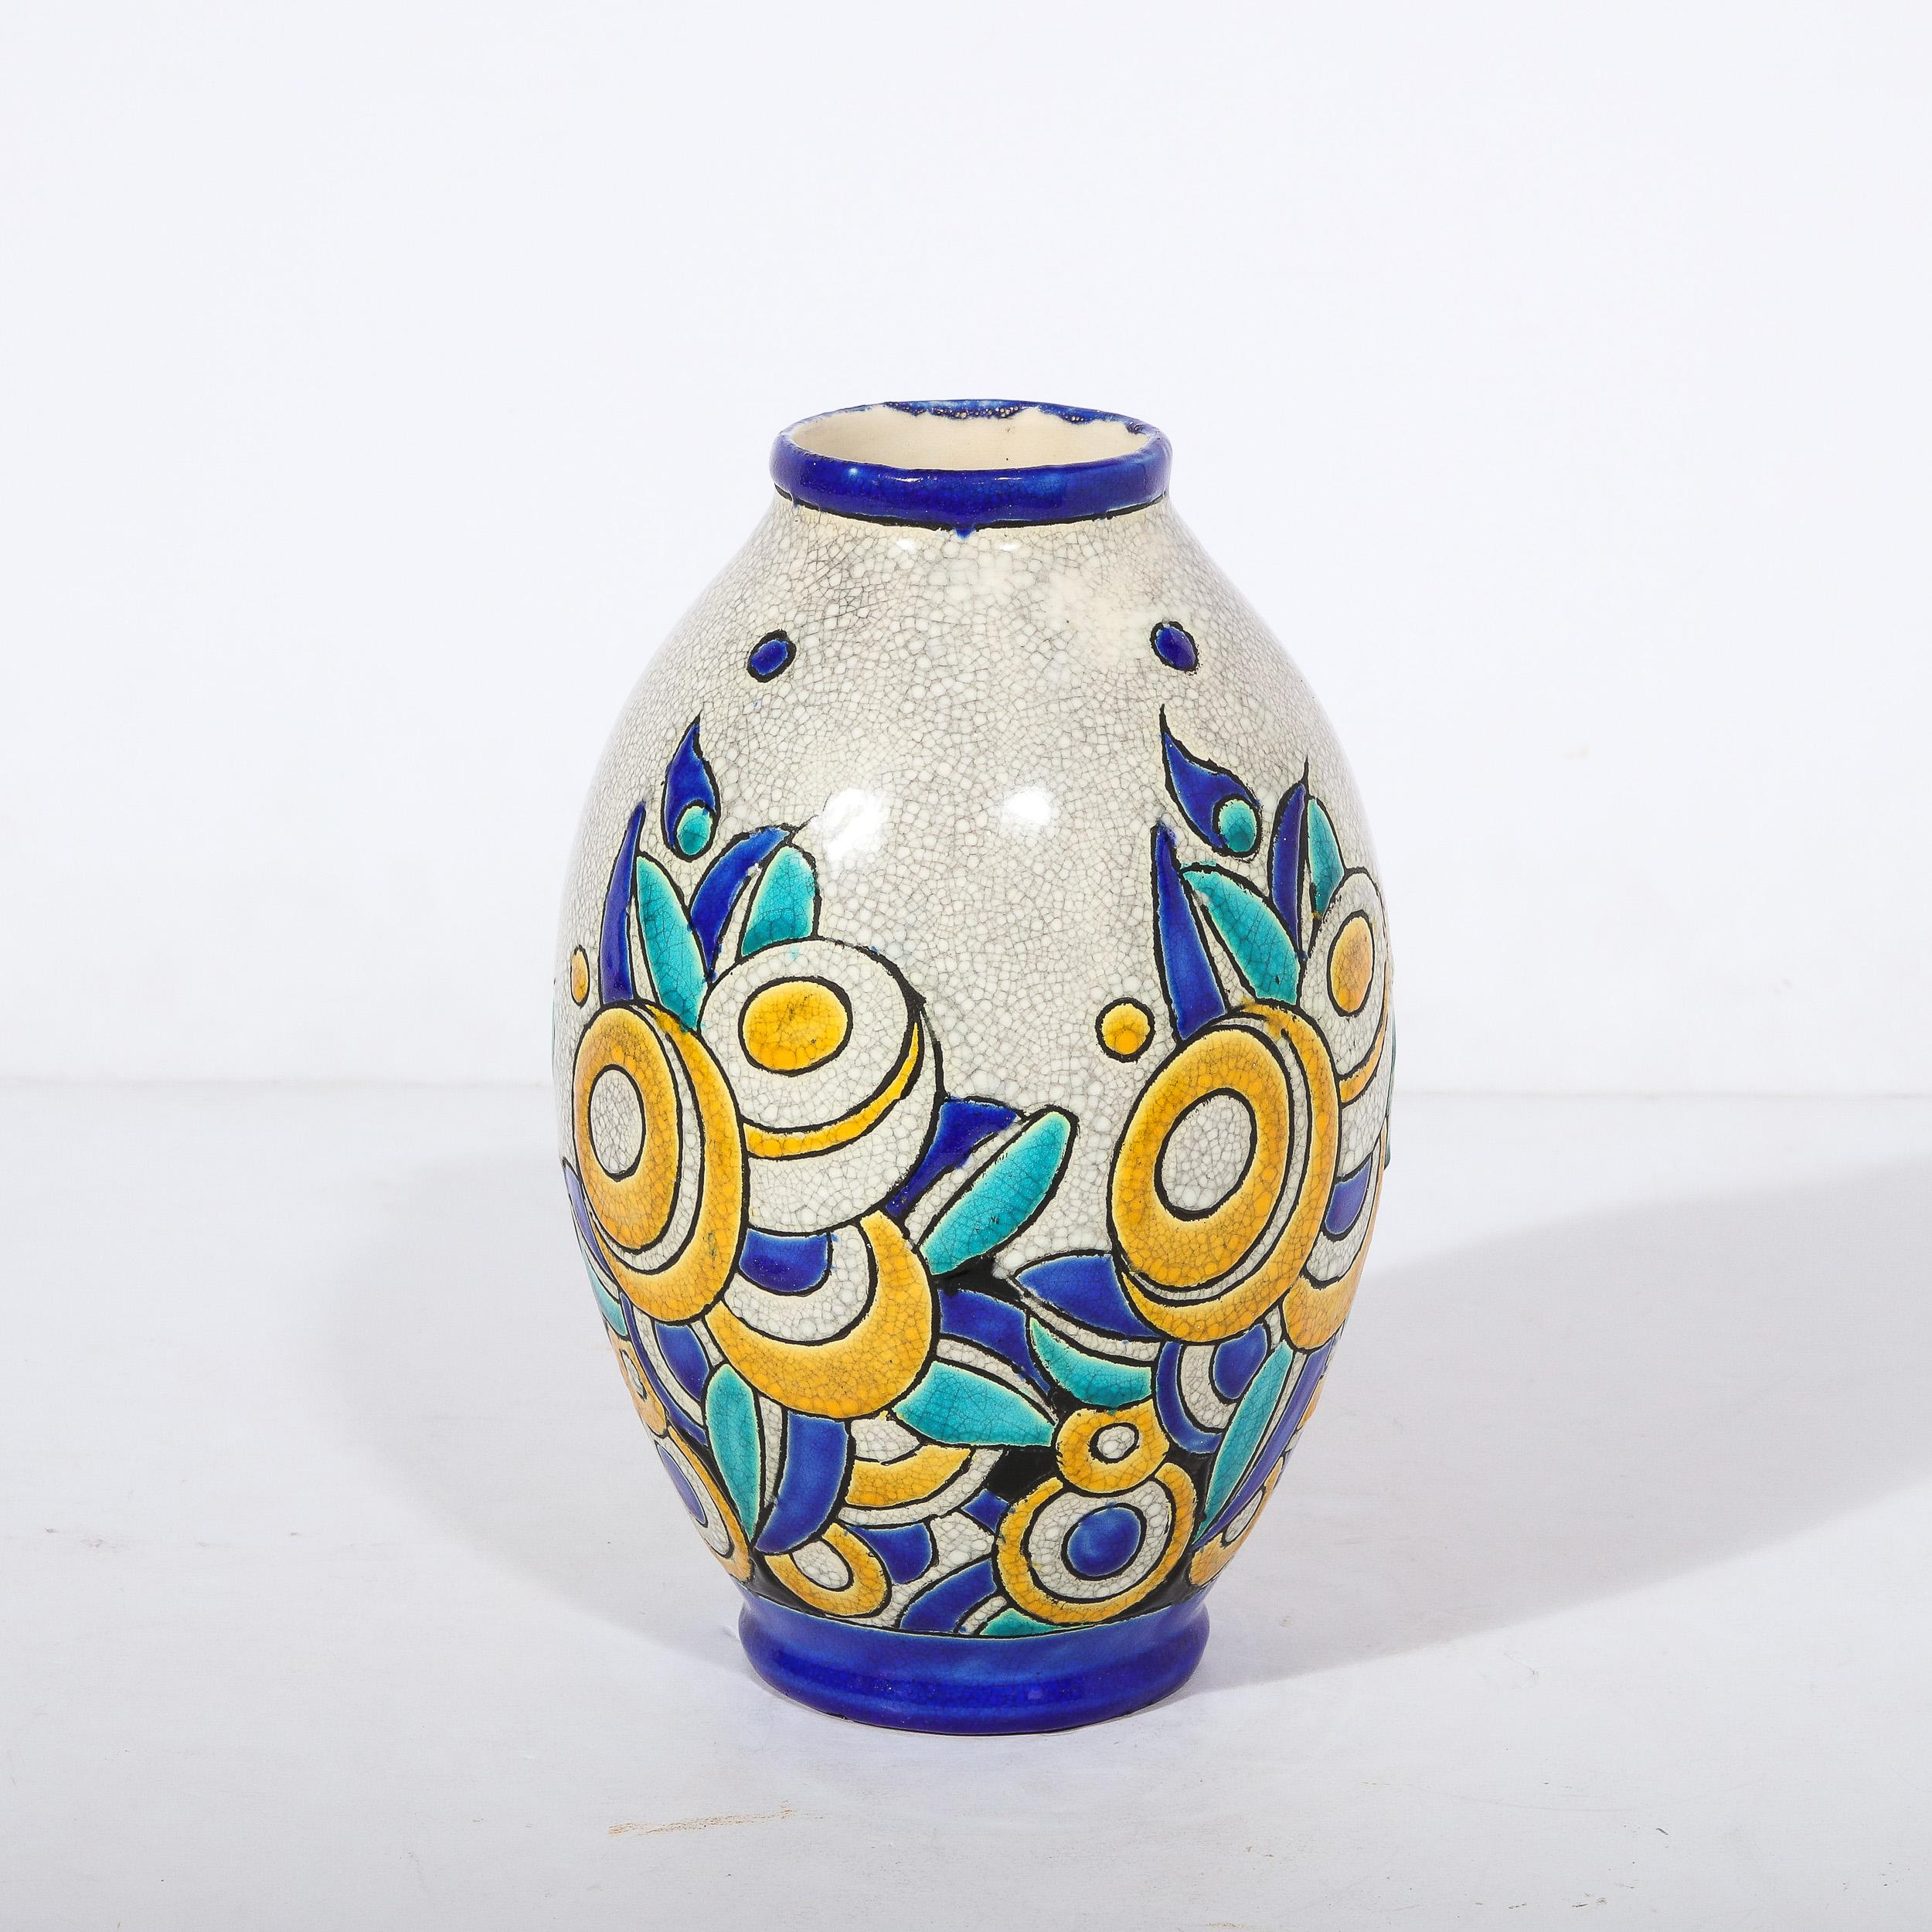 Art Deco Cubic Floral Ceramic Vase by Charles Catteau for Boch Freres Keramis In Excellent Condition For Sale In New York, NY